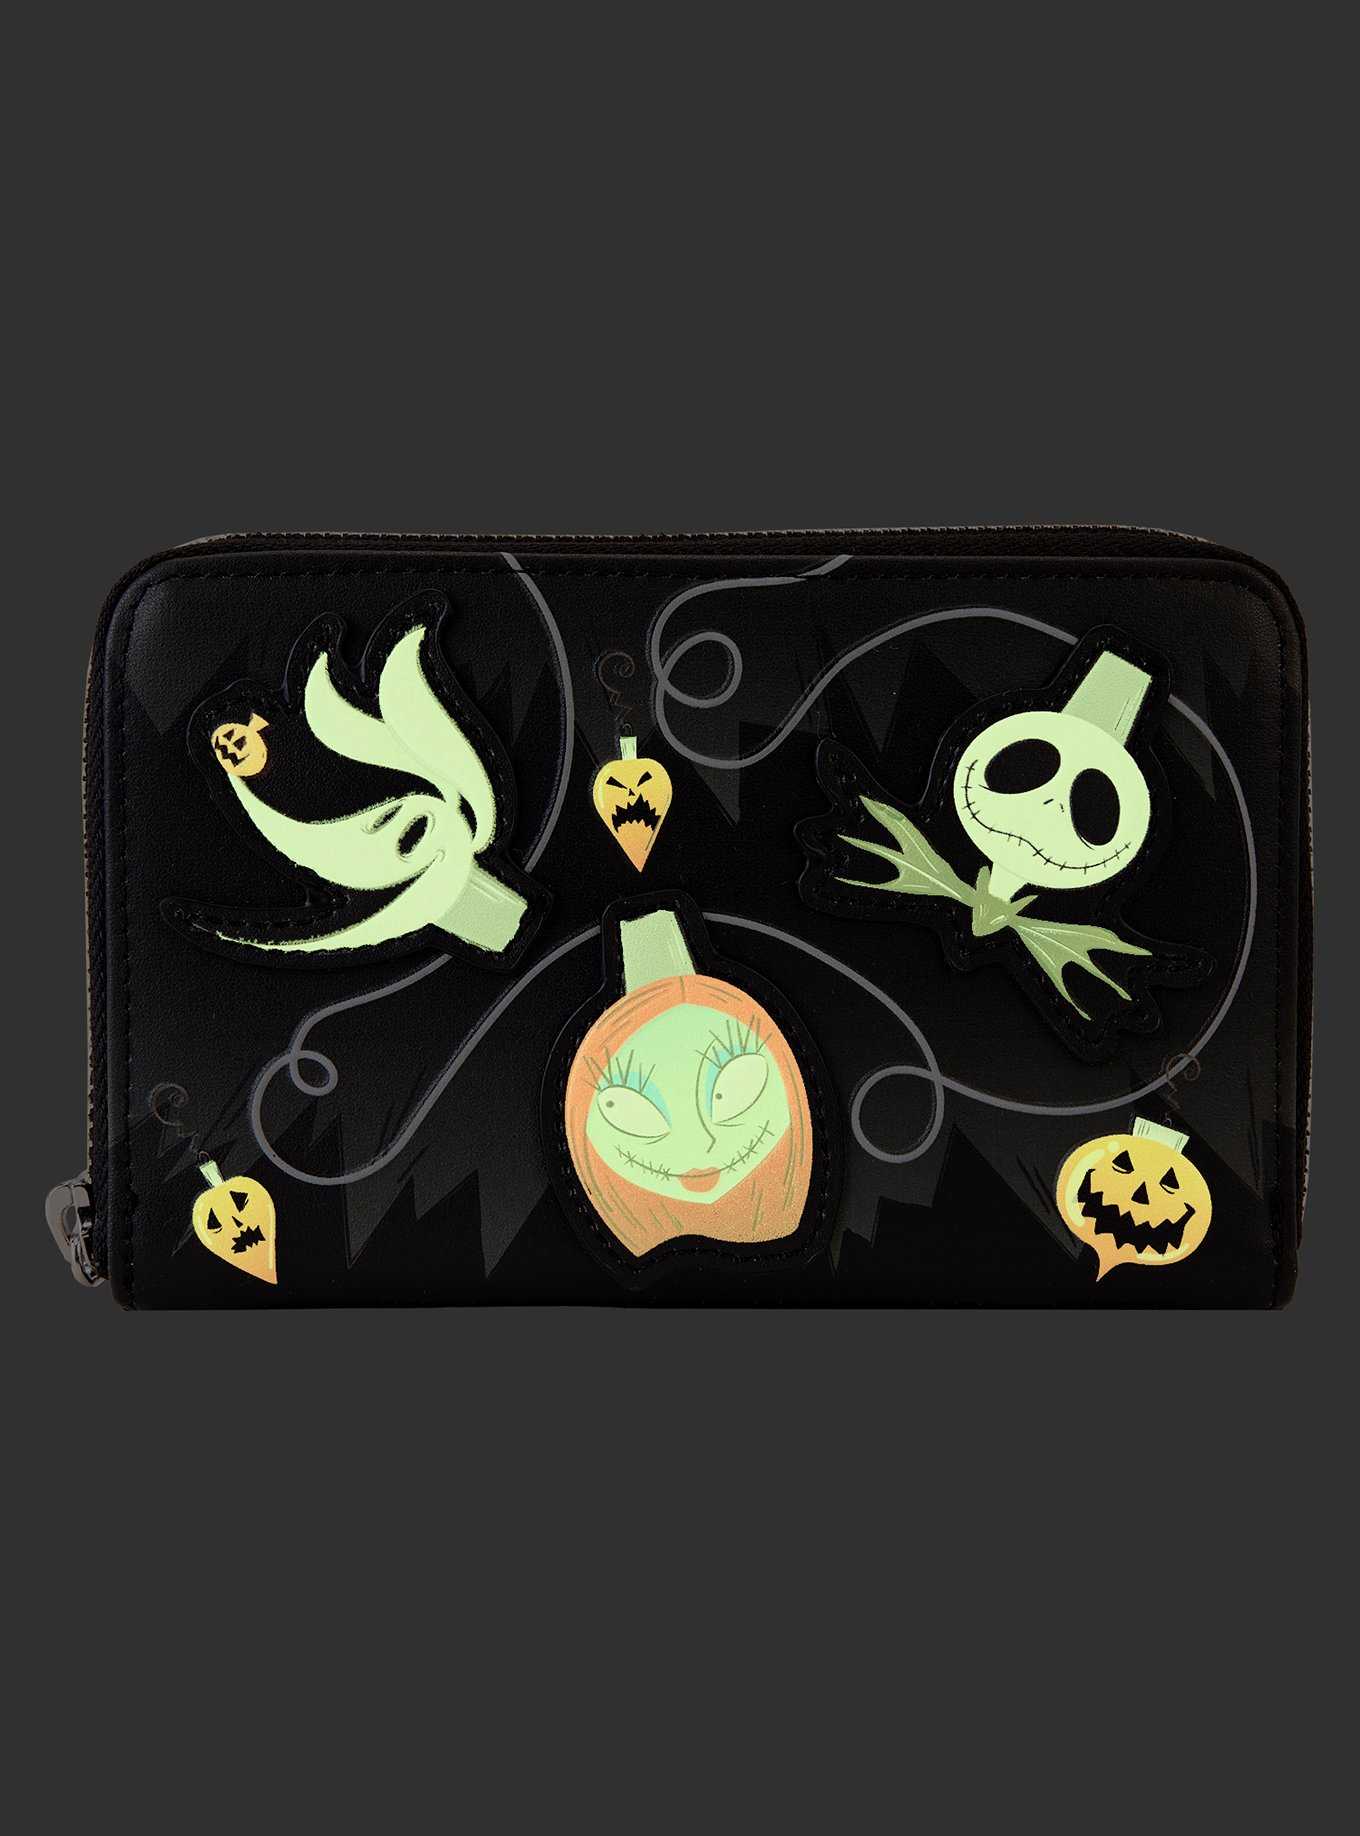 Loungefly The Nightmare Before Christmas Tree & Ornaments Zipper Wallet, , hi-res